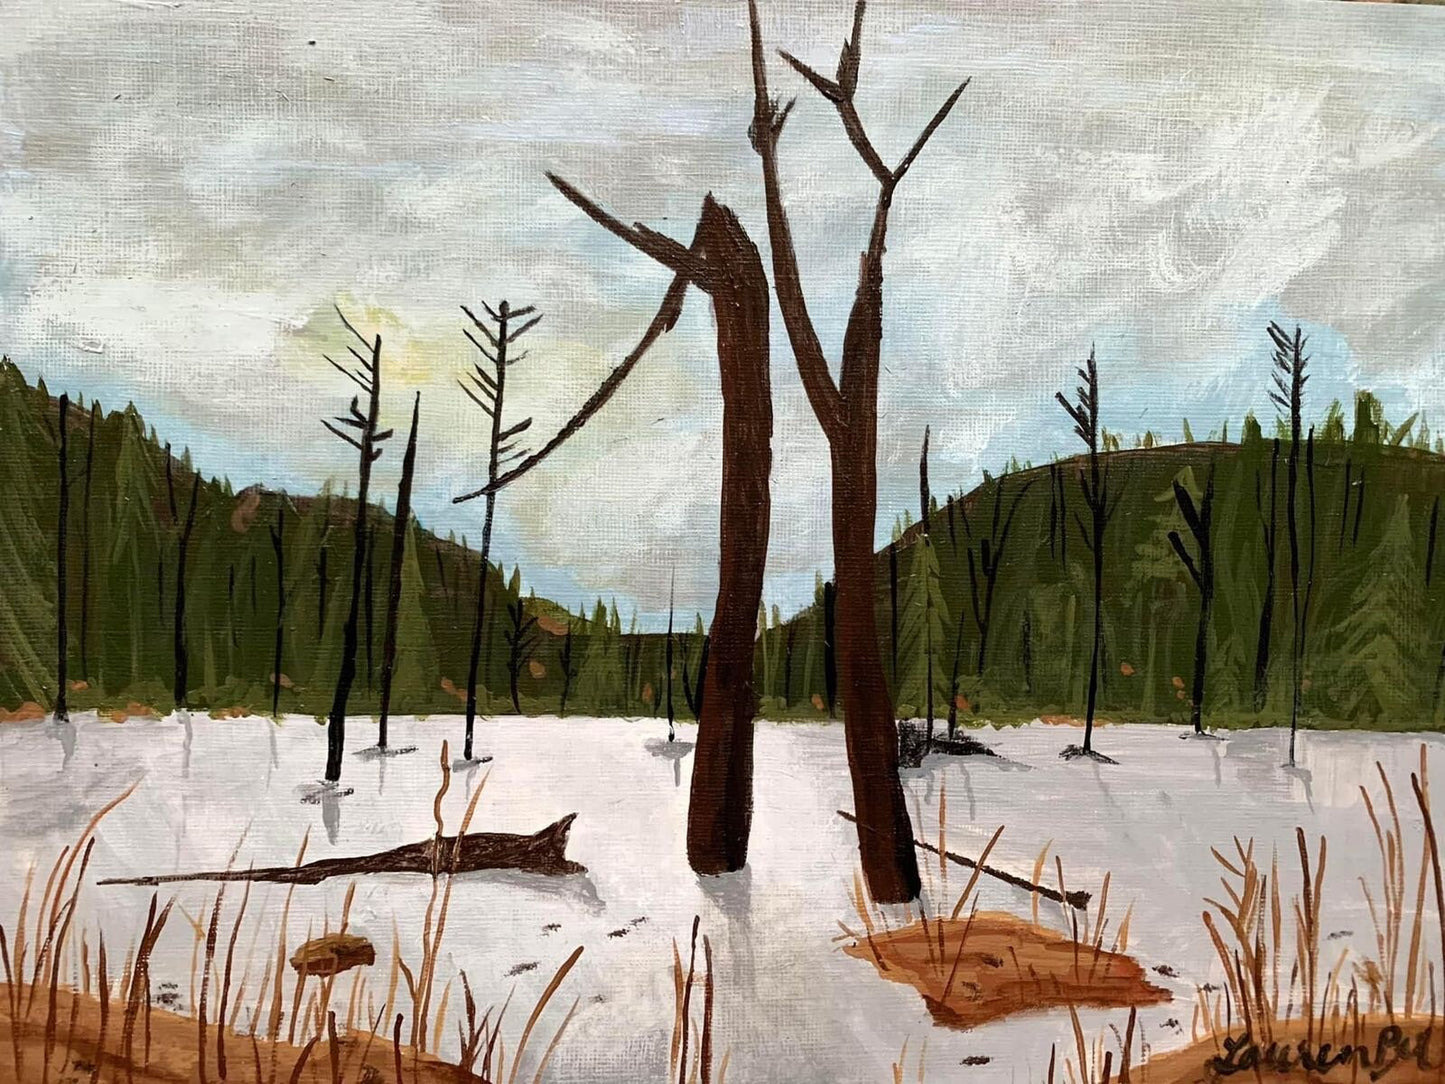 Snags in the ice at Puffin Pond; 9x12 acrylic on paper